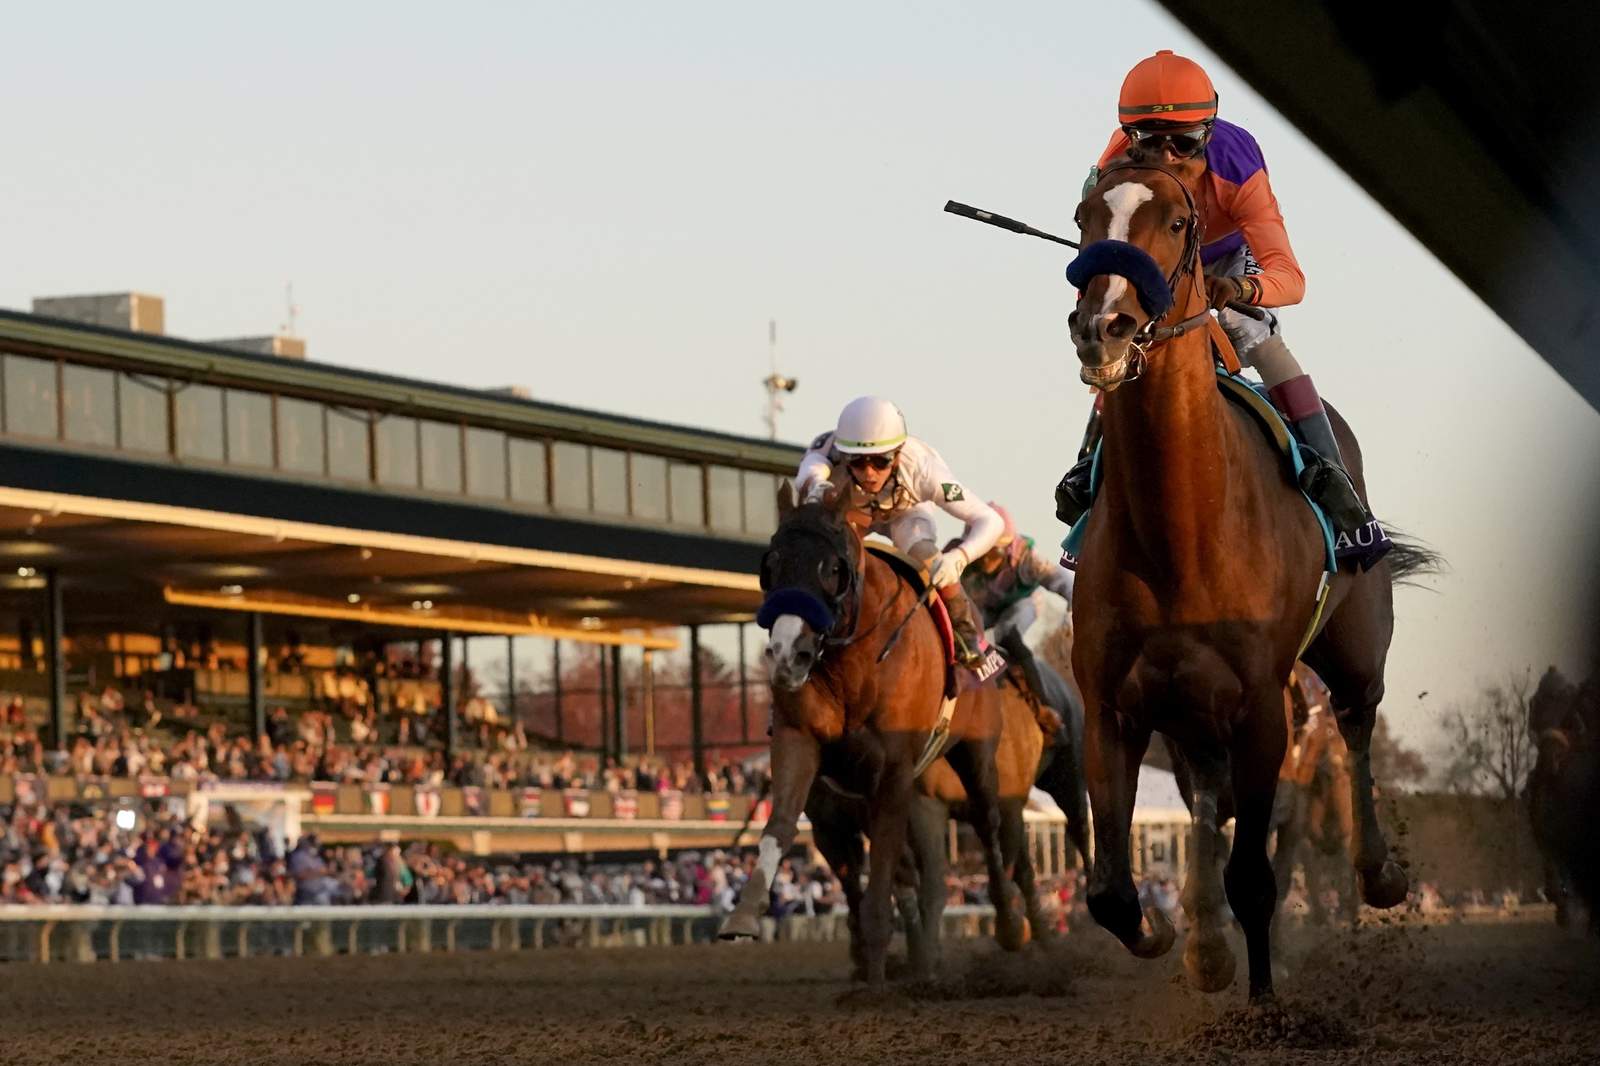 Horse racing hopes for return to normal, with fans, in 2021